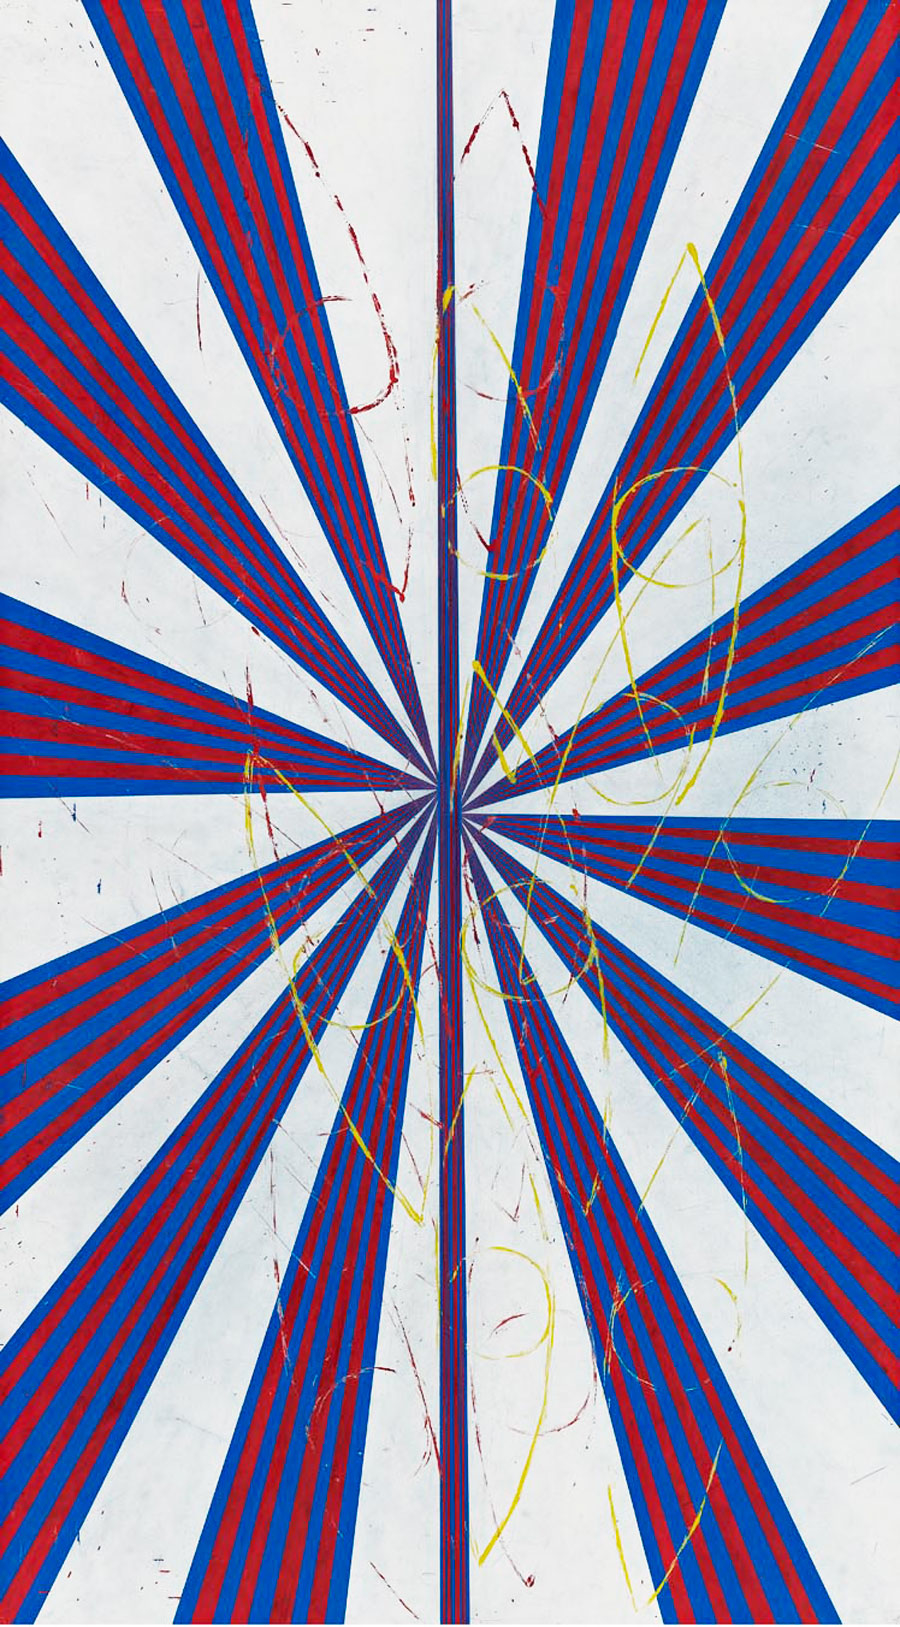 Mark Grotjahn, Untitled (Captain America Drawing in Ten Parts 41.17), 2008–09 (part three), color pencil and oil on paper, in ten parts, part three: 85 5/8 × 47 5/8 inches (217.5 × 121 cm) © Mark Grotjahn. Photo by Douglas M. Parker Studio. Image courtesy of Gagosian